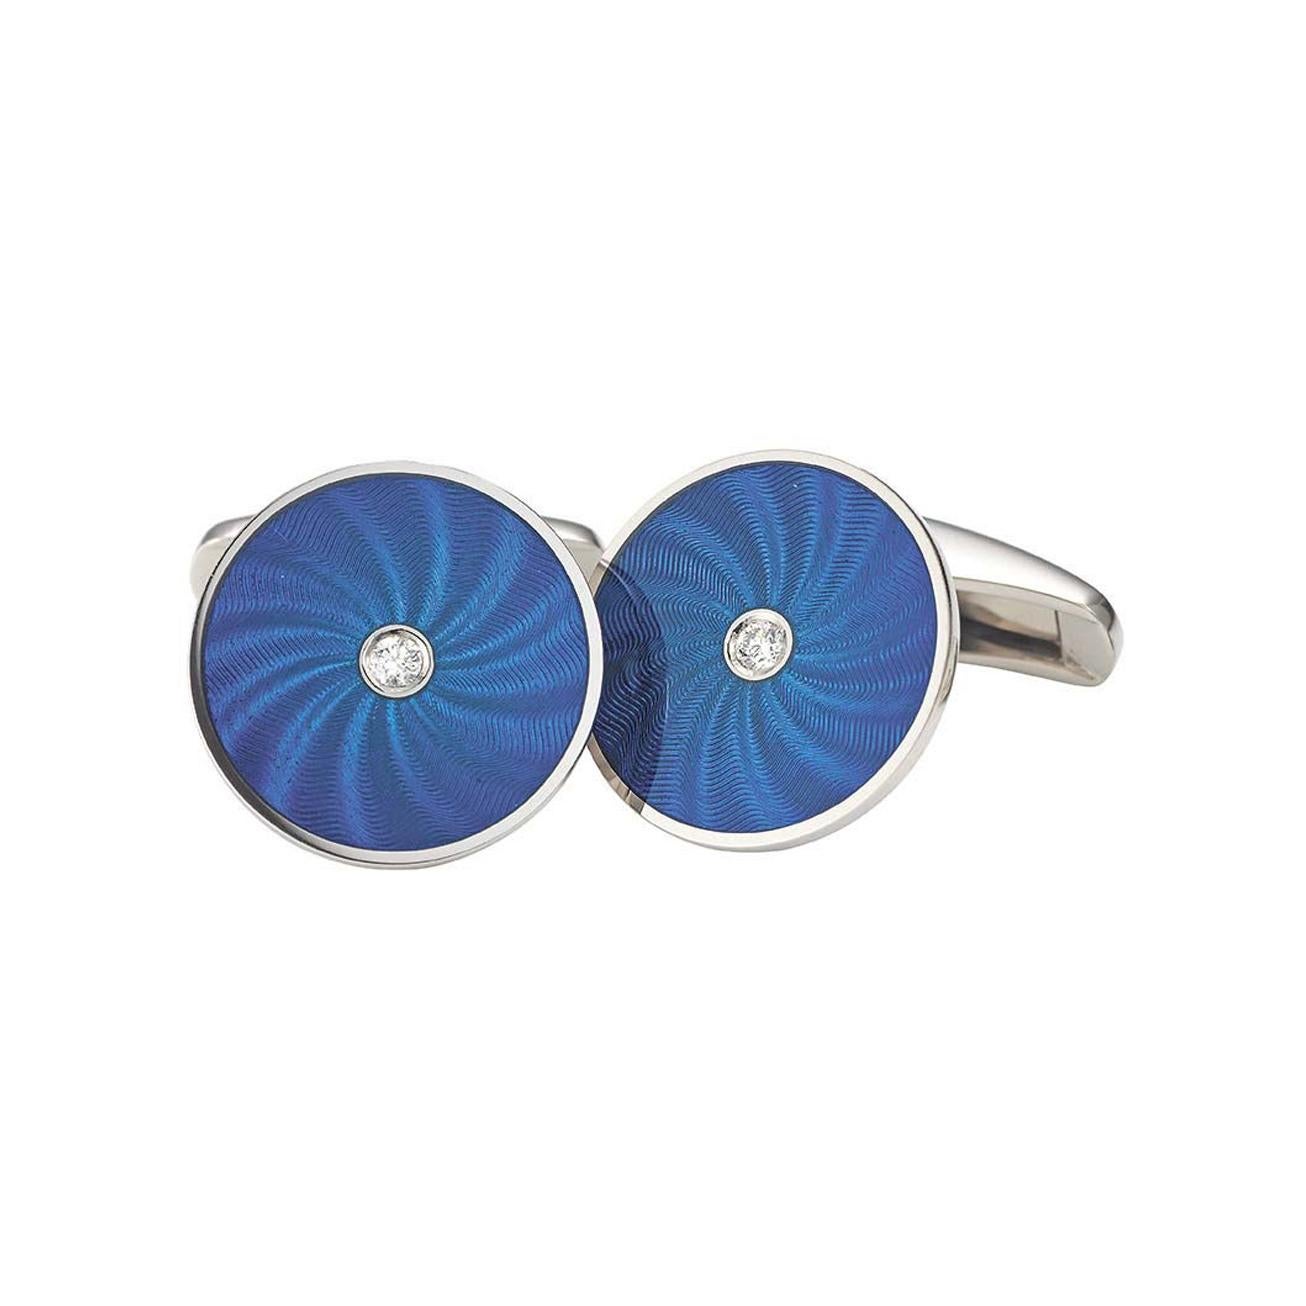 Victor Mayer Globetrotter Collection Round Cufflinks 18k White Gold Blue Guilloche Enamel & Diamonds Ø 17 mm

VICTOR MAYER is a fine jewelry house known for its sophisticated craftsmanship. Since 1989, the company has been closely associated with